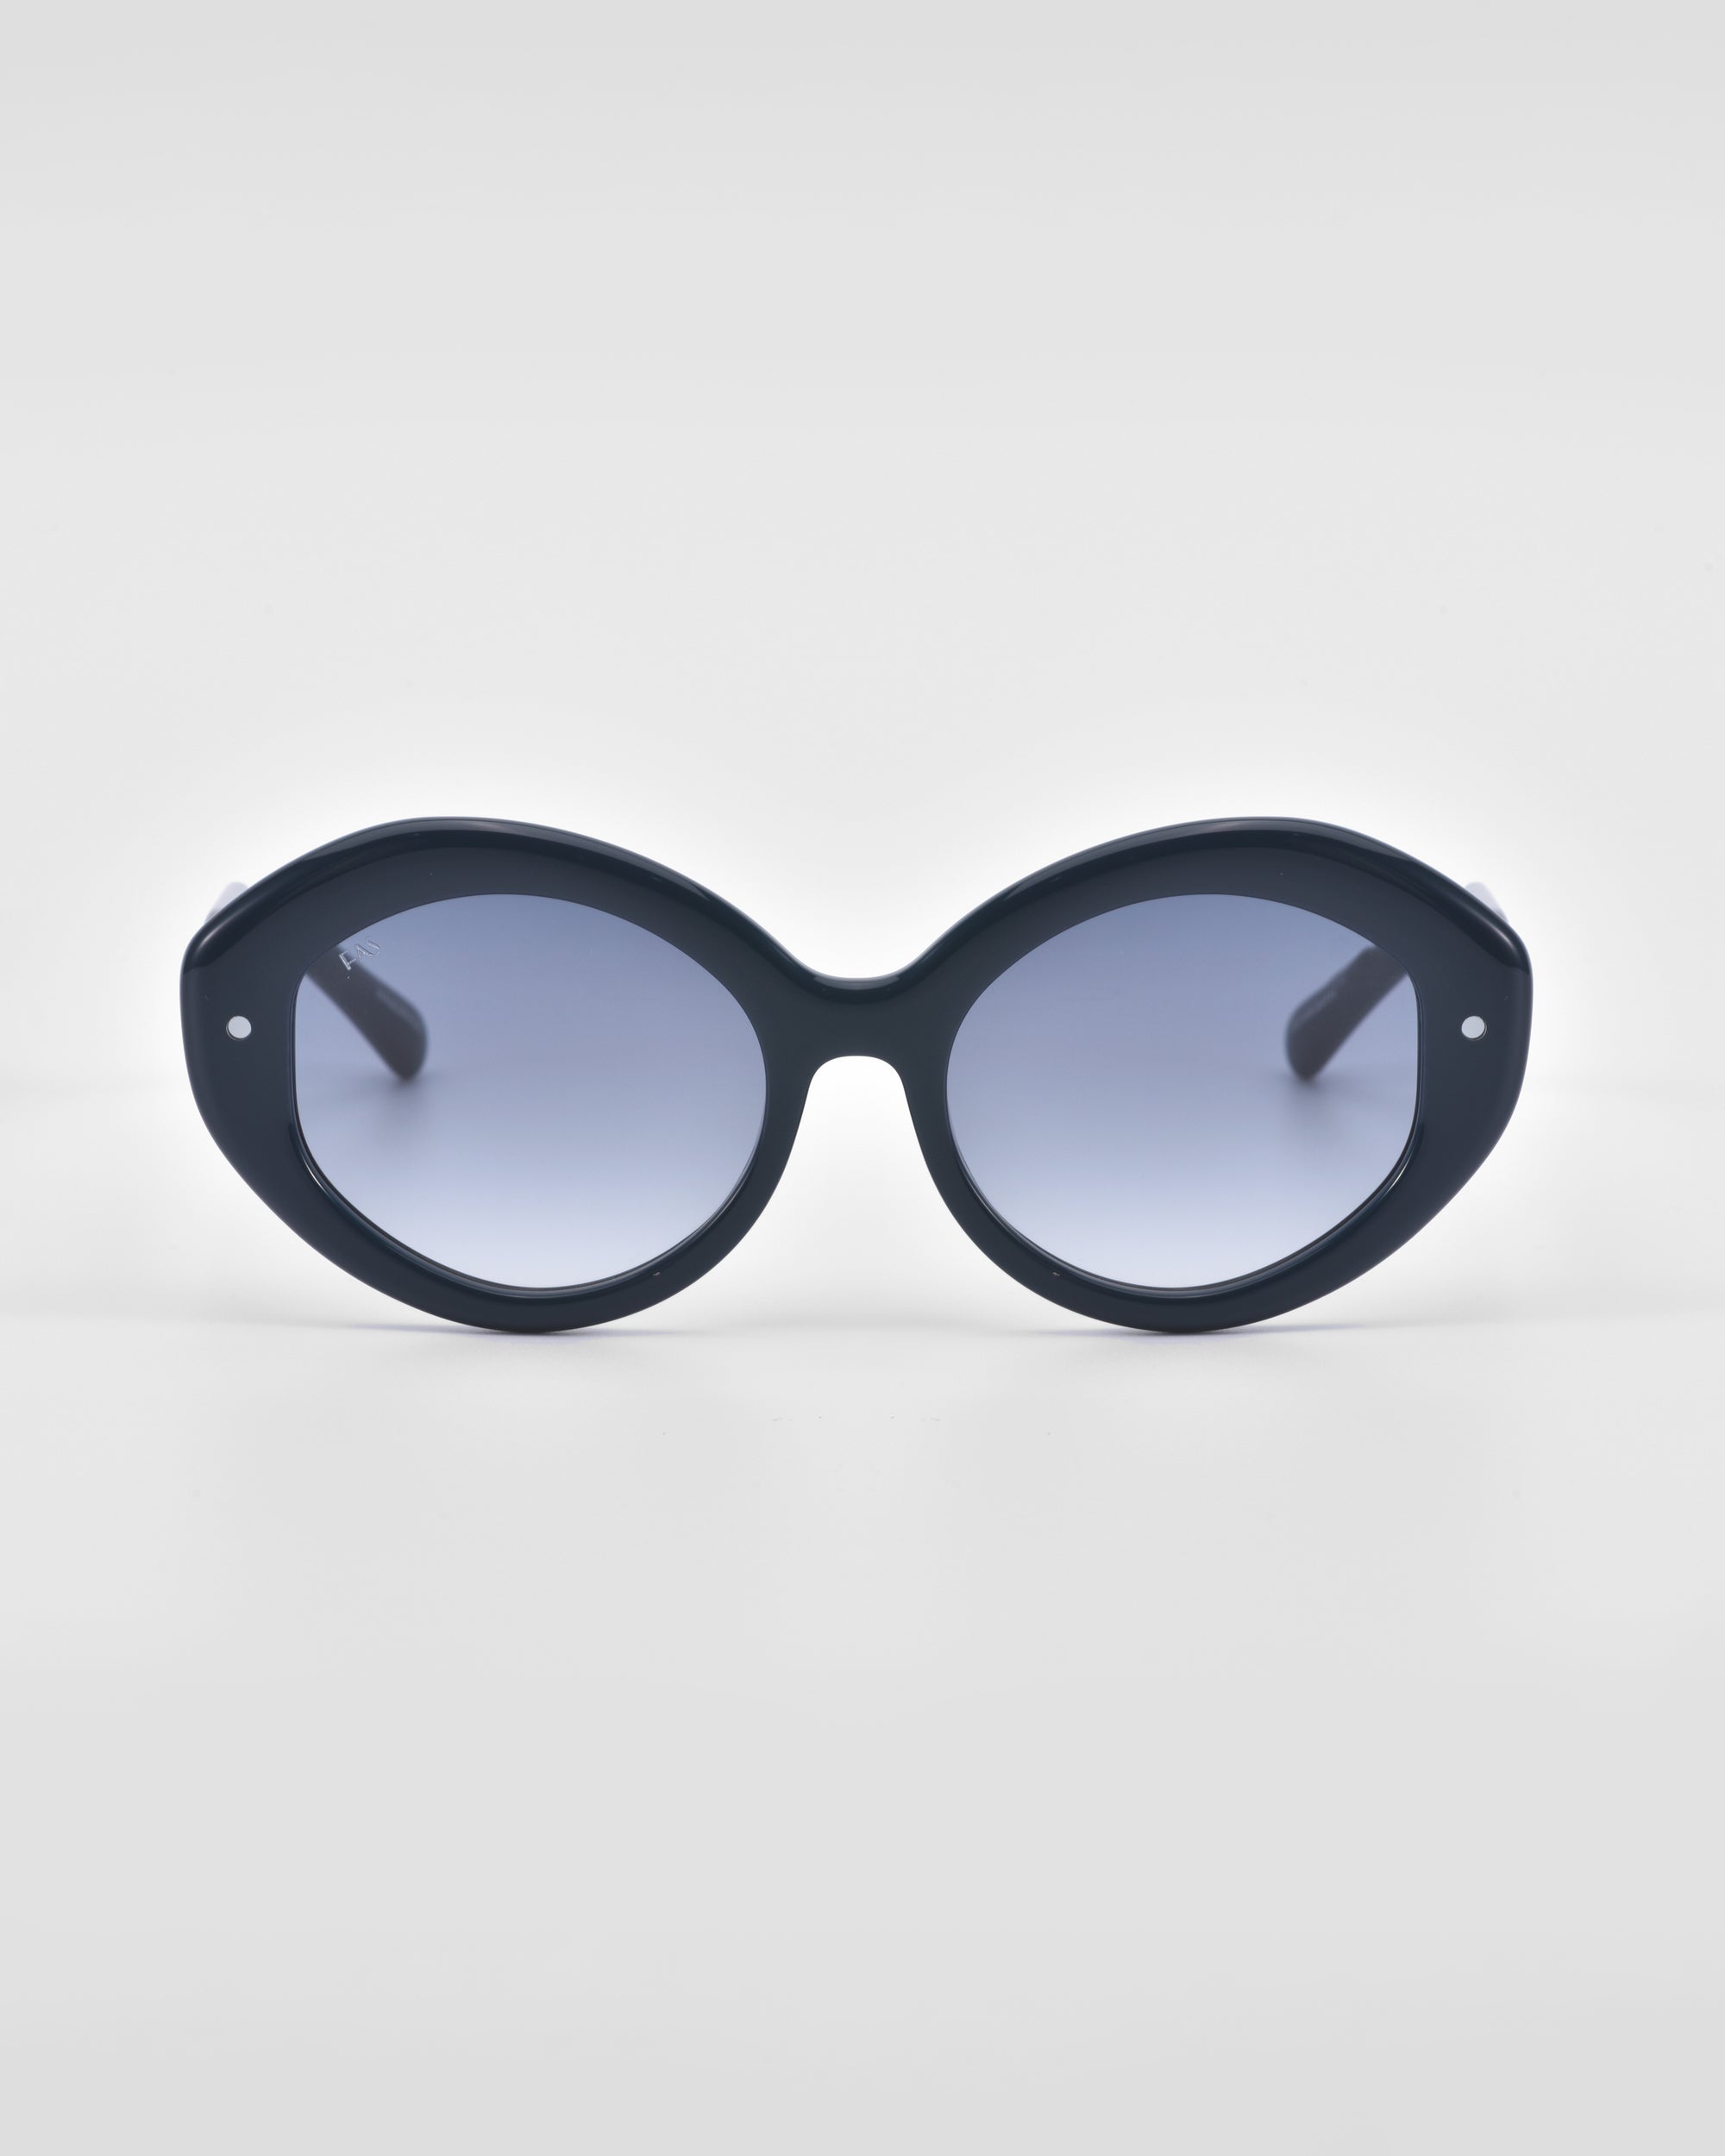 A pair of For Art's Sake® Helios sunglasses featuring an oversized, round design with tinted lenses is displayed against a plain white background, offering a touch of luxury eyewear.